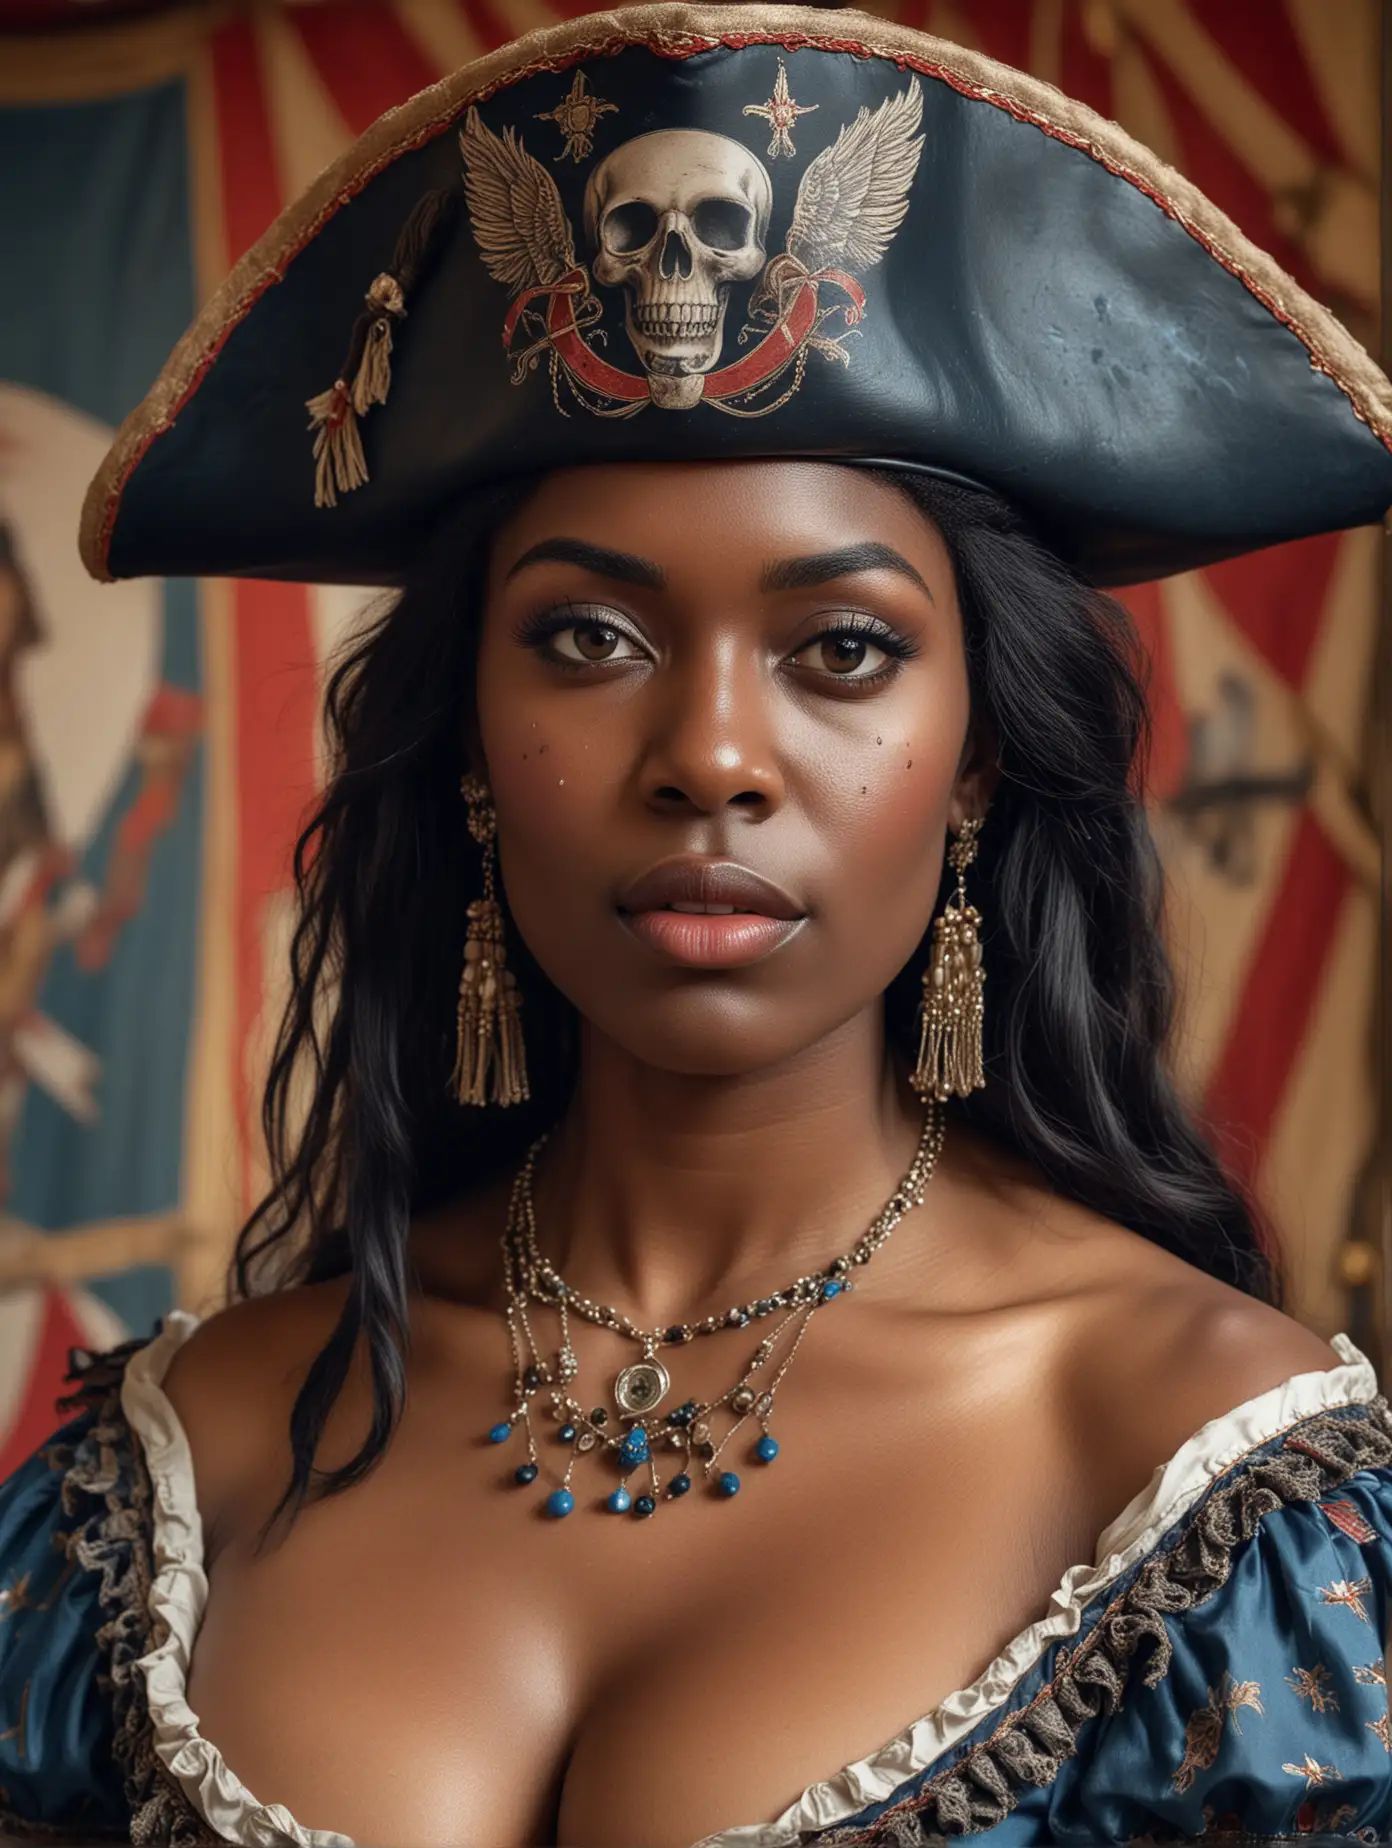 close up portrait, highly detailed, circus, in the style of whimsical yet eerie symbolism, France 1860's, light red, white and blue palette, close up portraiture, well built, African black skinned female with long black hair, big boobs, wearing a pirate themed outfit, bicorne pirate hat, Napoleonic revolutionary theme, covered in tattoos, inside a circus tent, nature-inspired pieces, circus costumes, ultra details